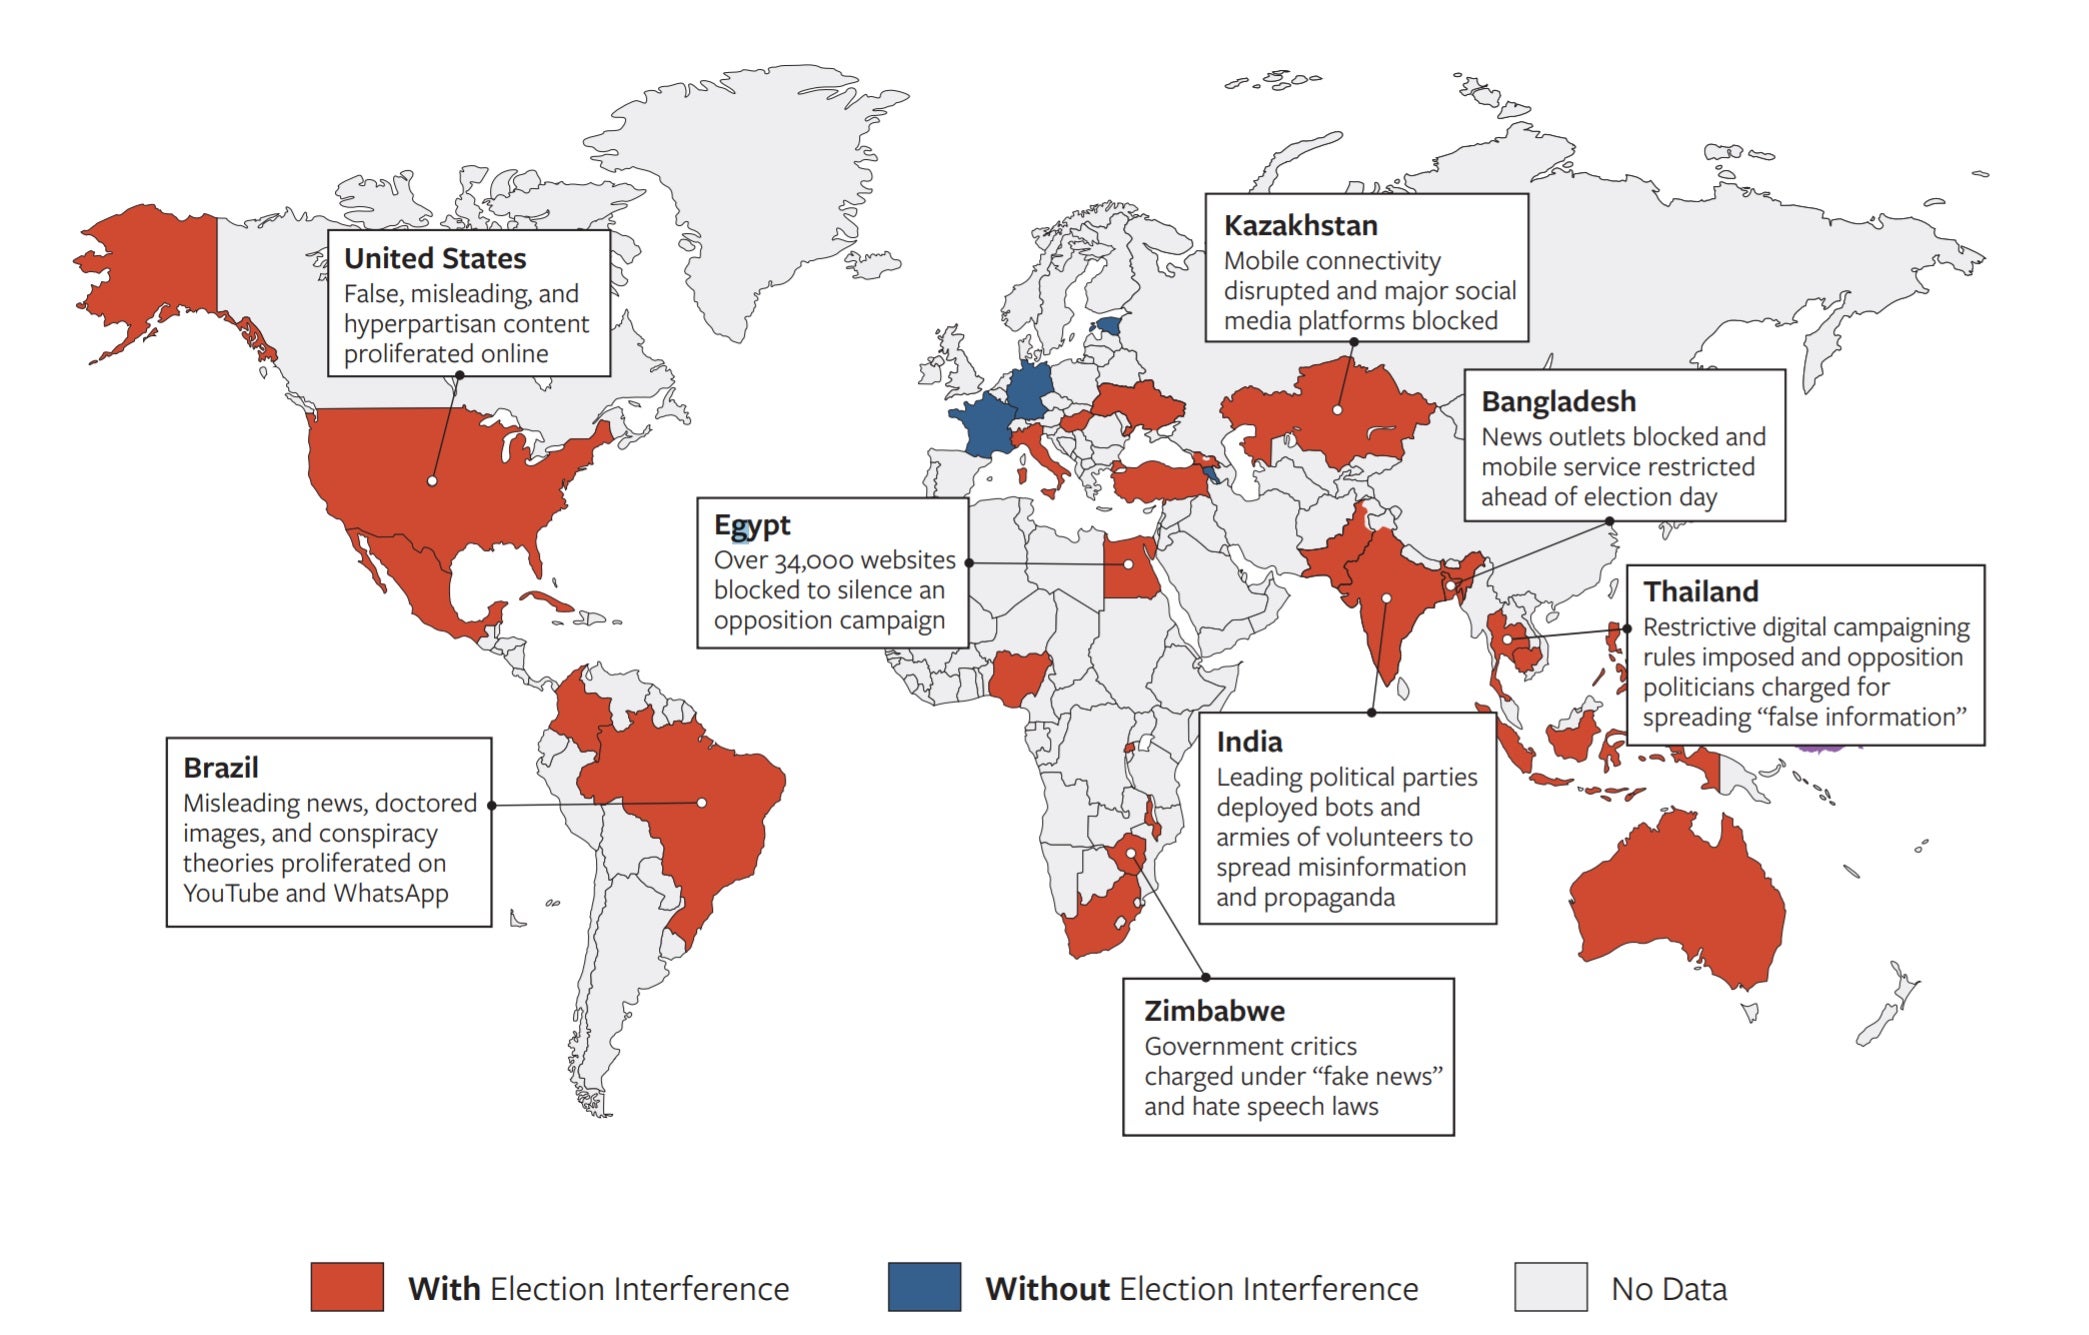 A map showing the global phenomenon of digital election interference